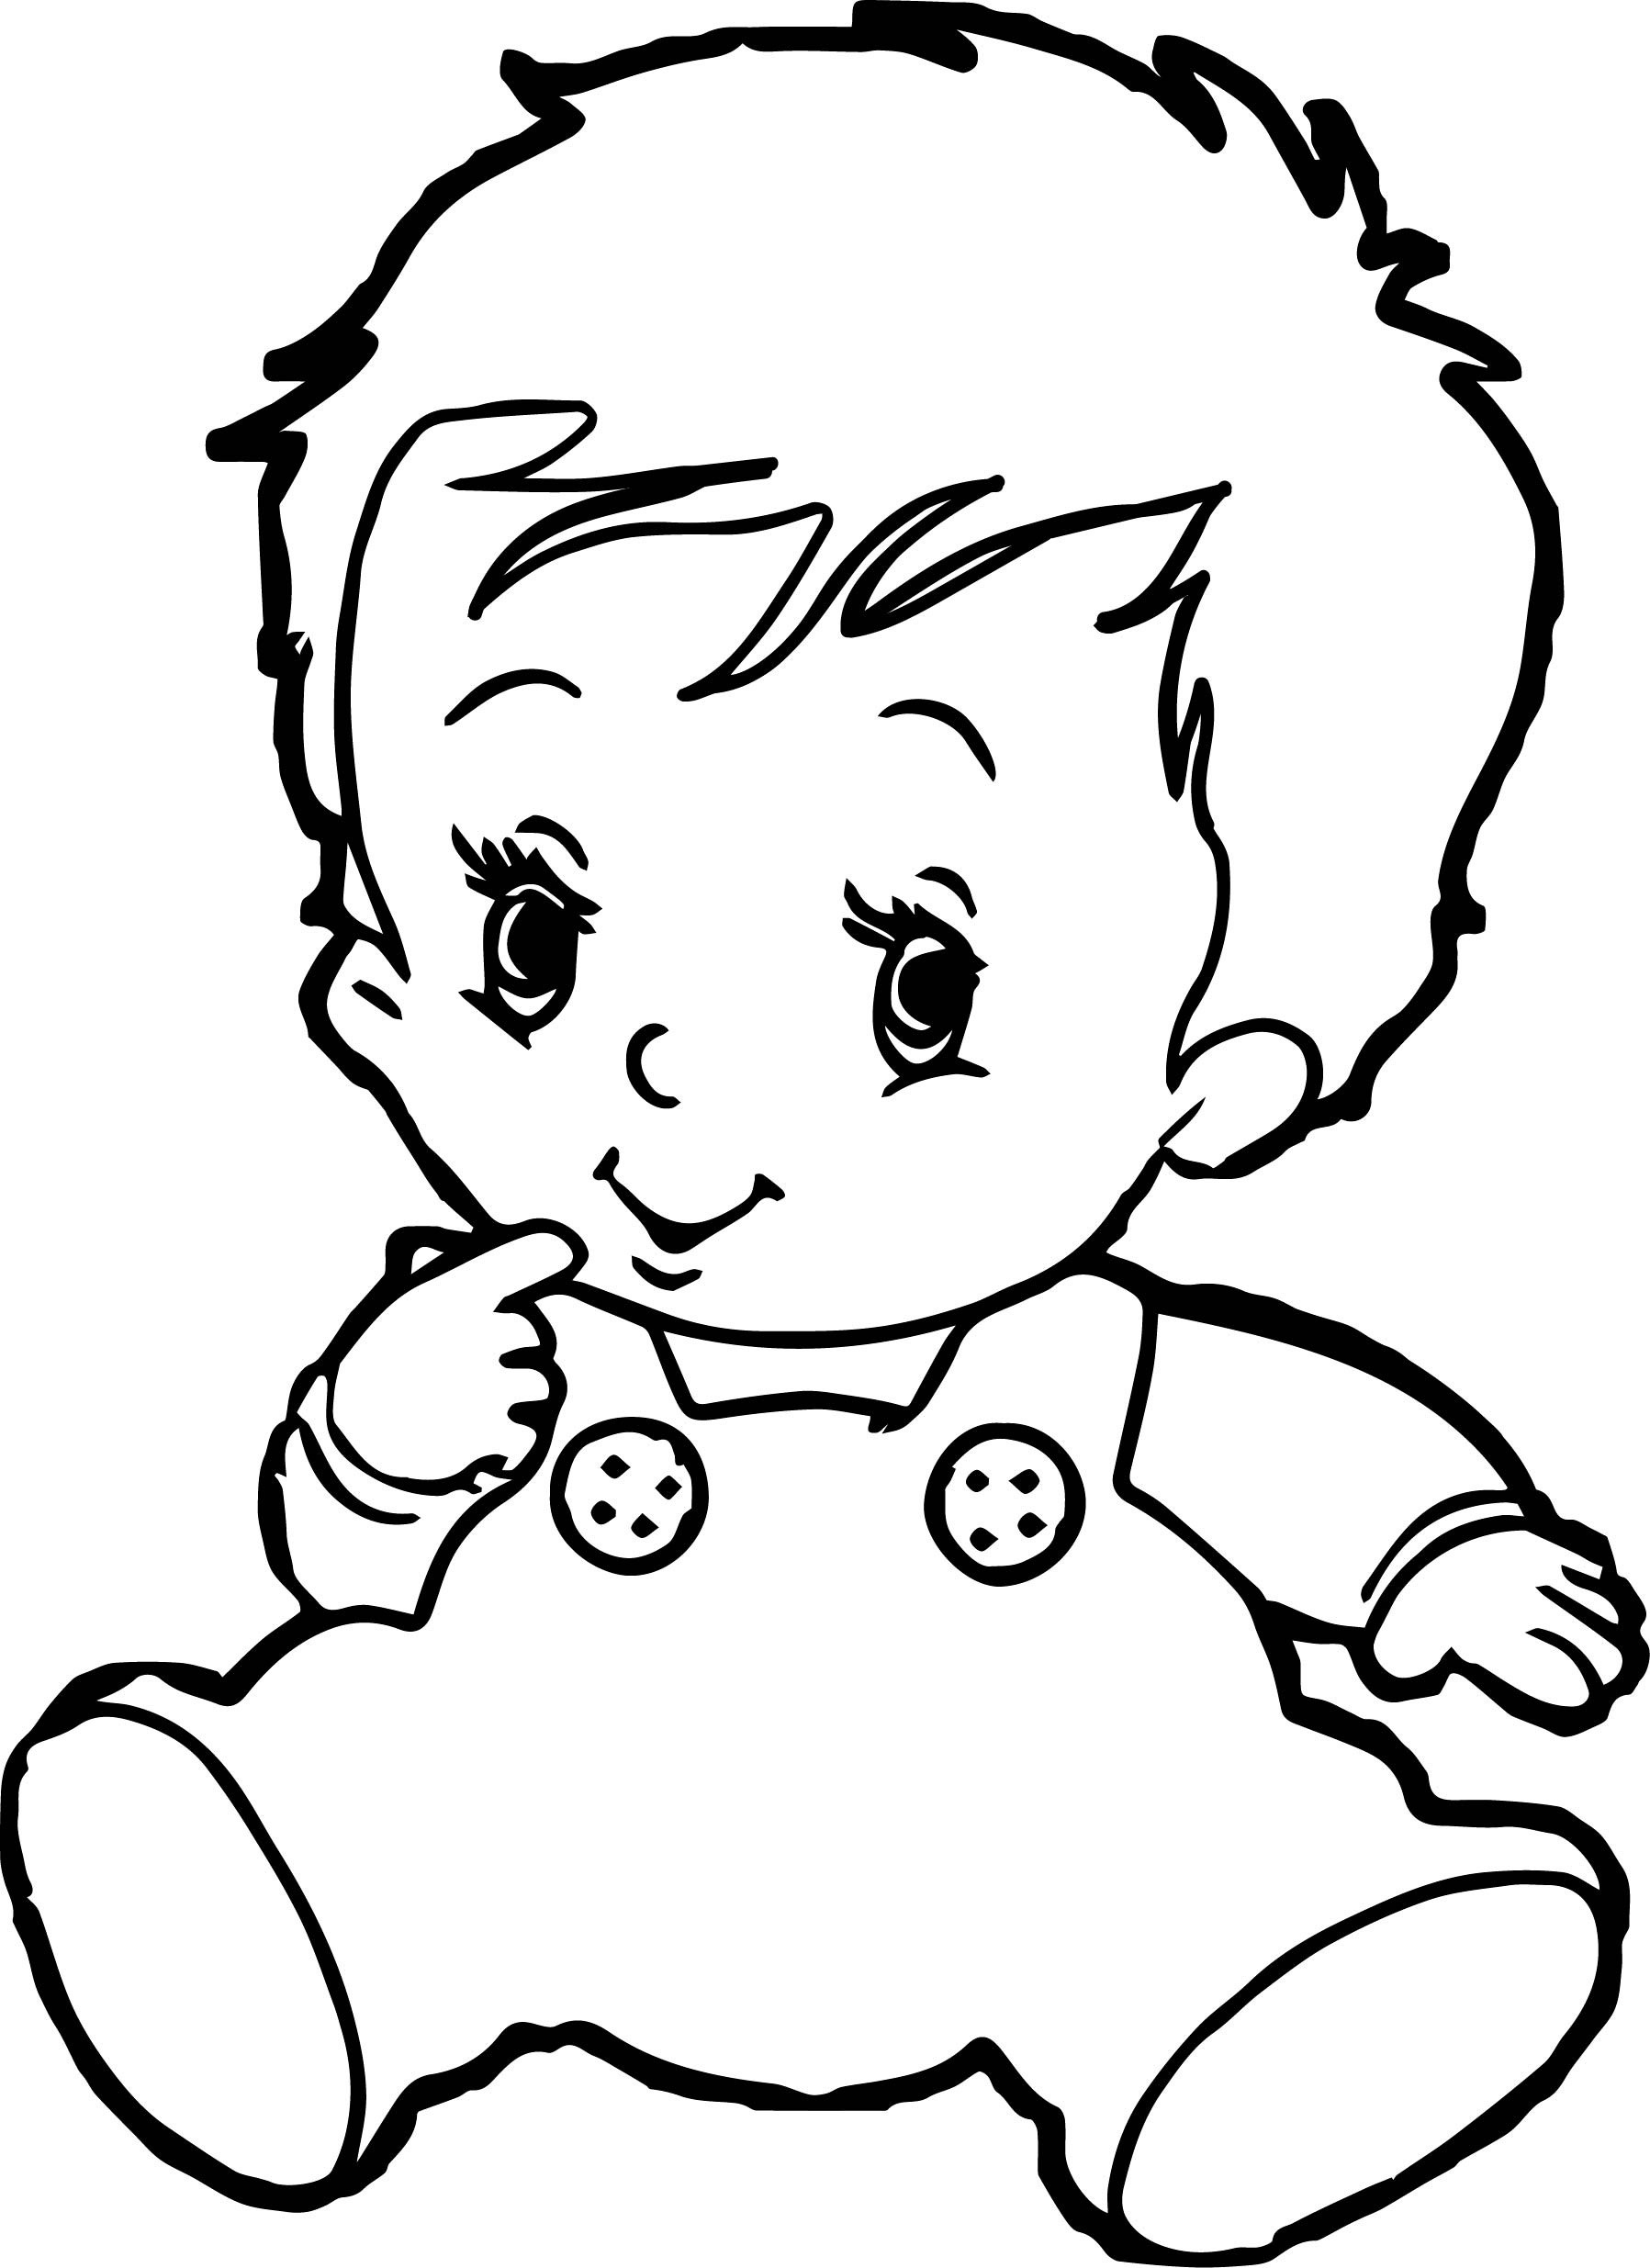 Baby Pictures Coloring Pages Pdf - Cute Baby Pictures Coloring Pages